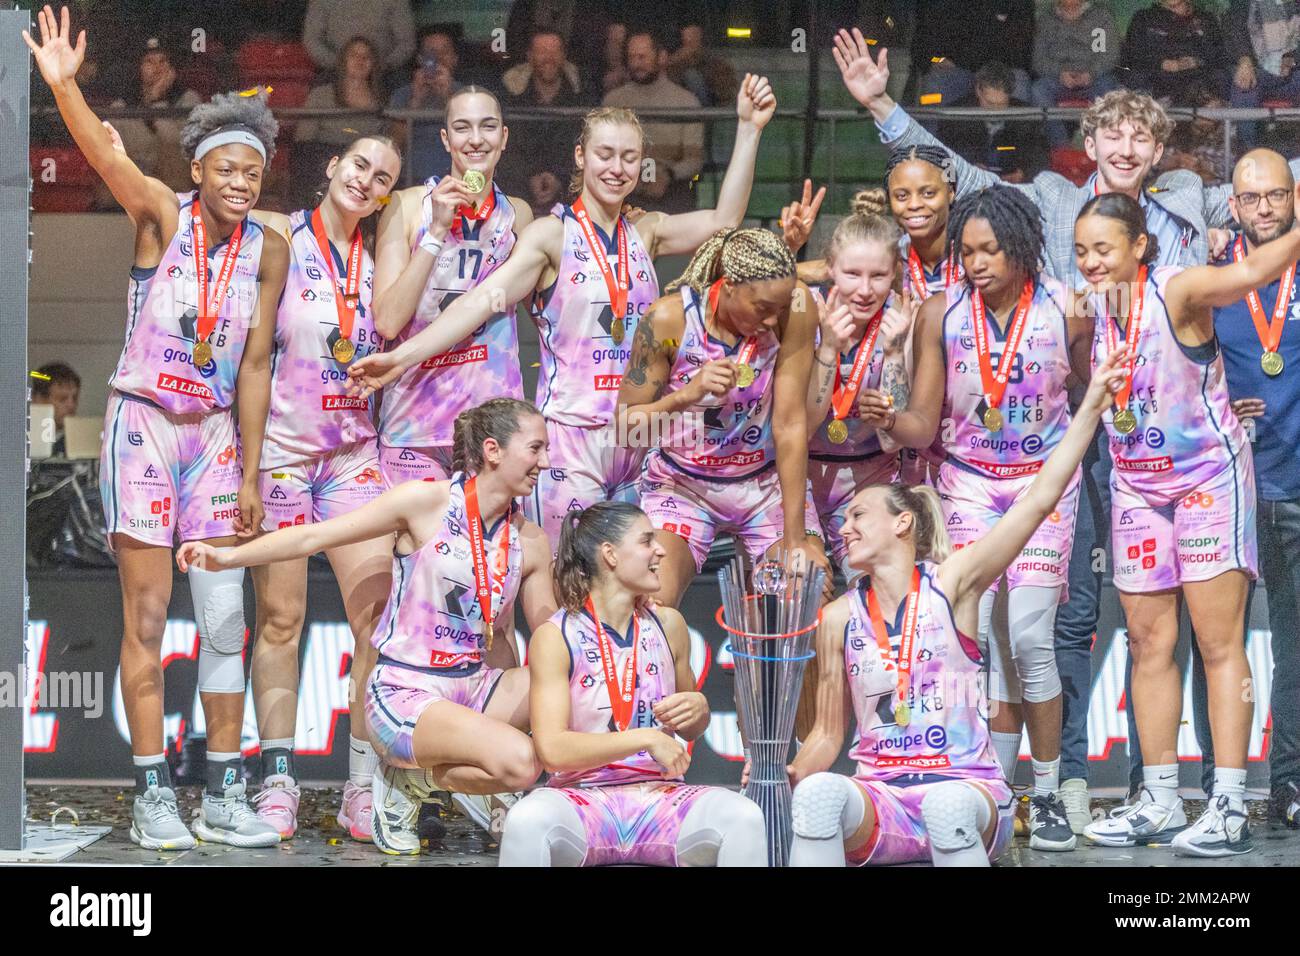 Montreux Switzerland, 01/29/2023: The BCF Elfic Bribourg team celebrates during Awards Ceremony of the Final of Swiss Basketball League 2023. The final of the Swiss Basketball League took place at the Perrier sports hall in the famous town of Montreux-Clarens. (Credit: Eric Dubost/Alamy Live News). Stock Photo